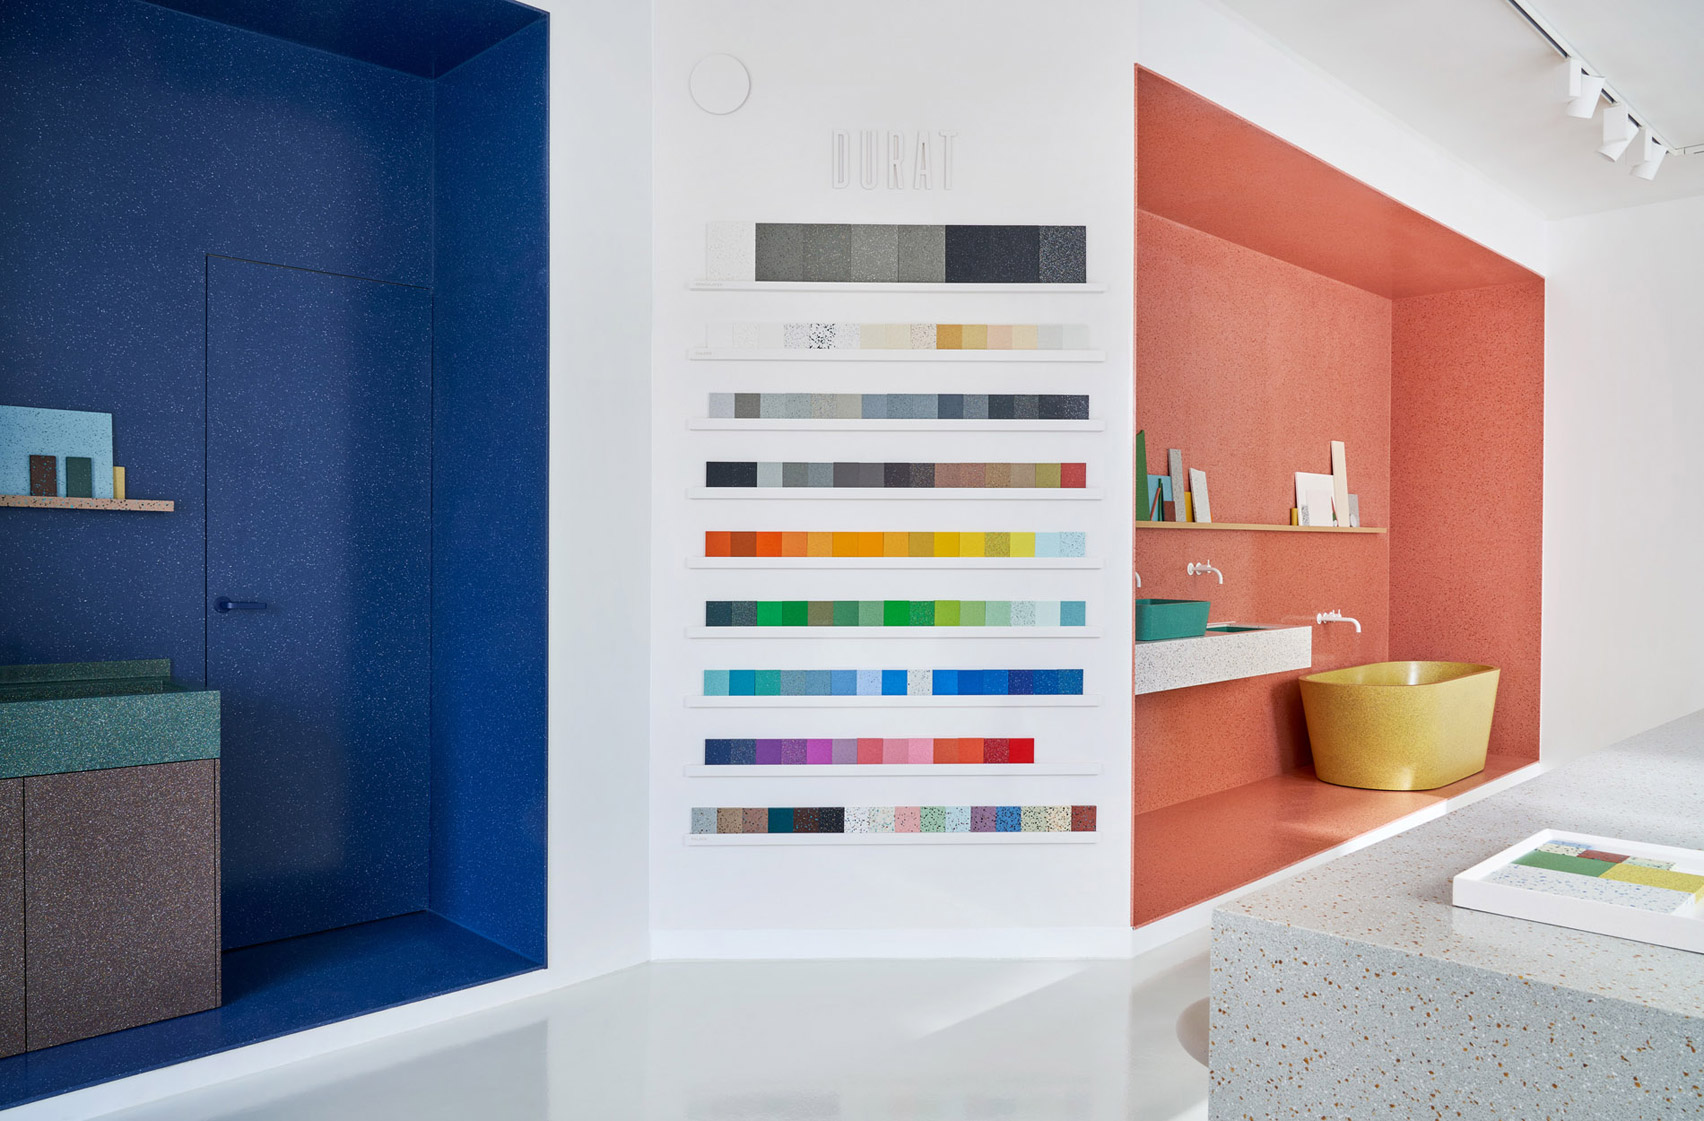 Photo of Durat showroom showing central island, three colourful displays and a wall of samples